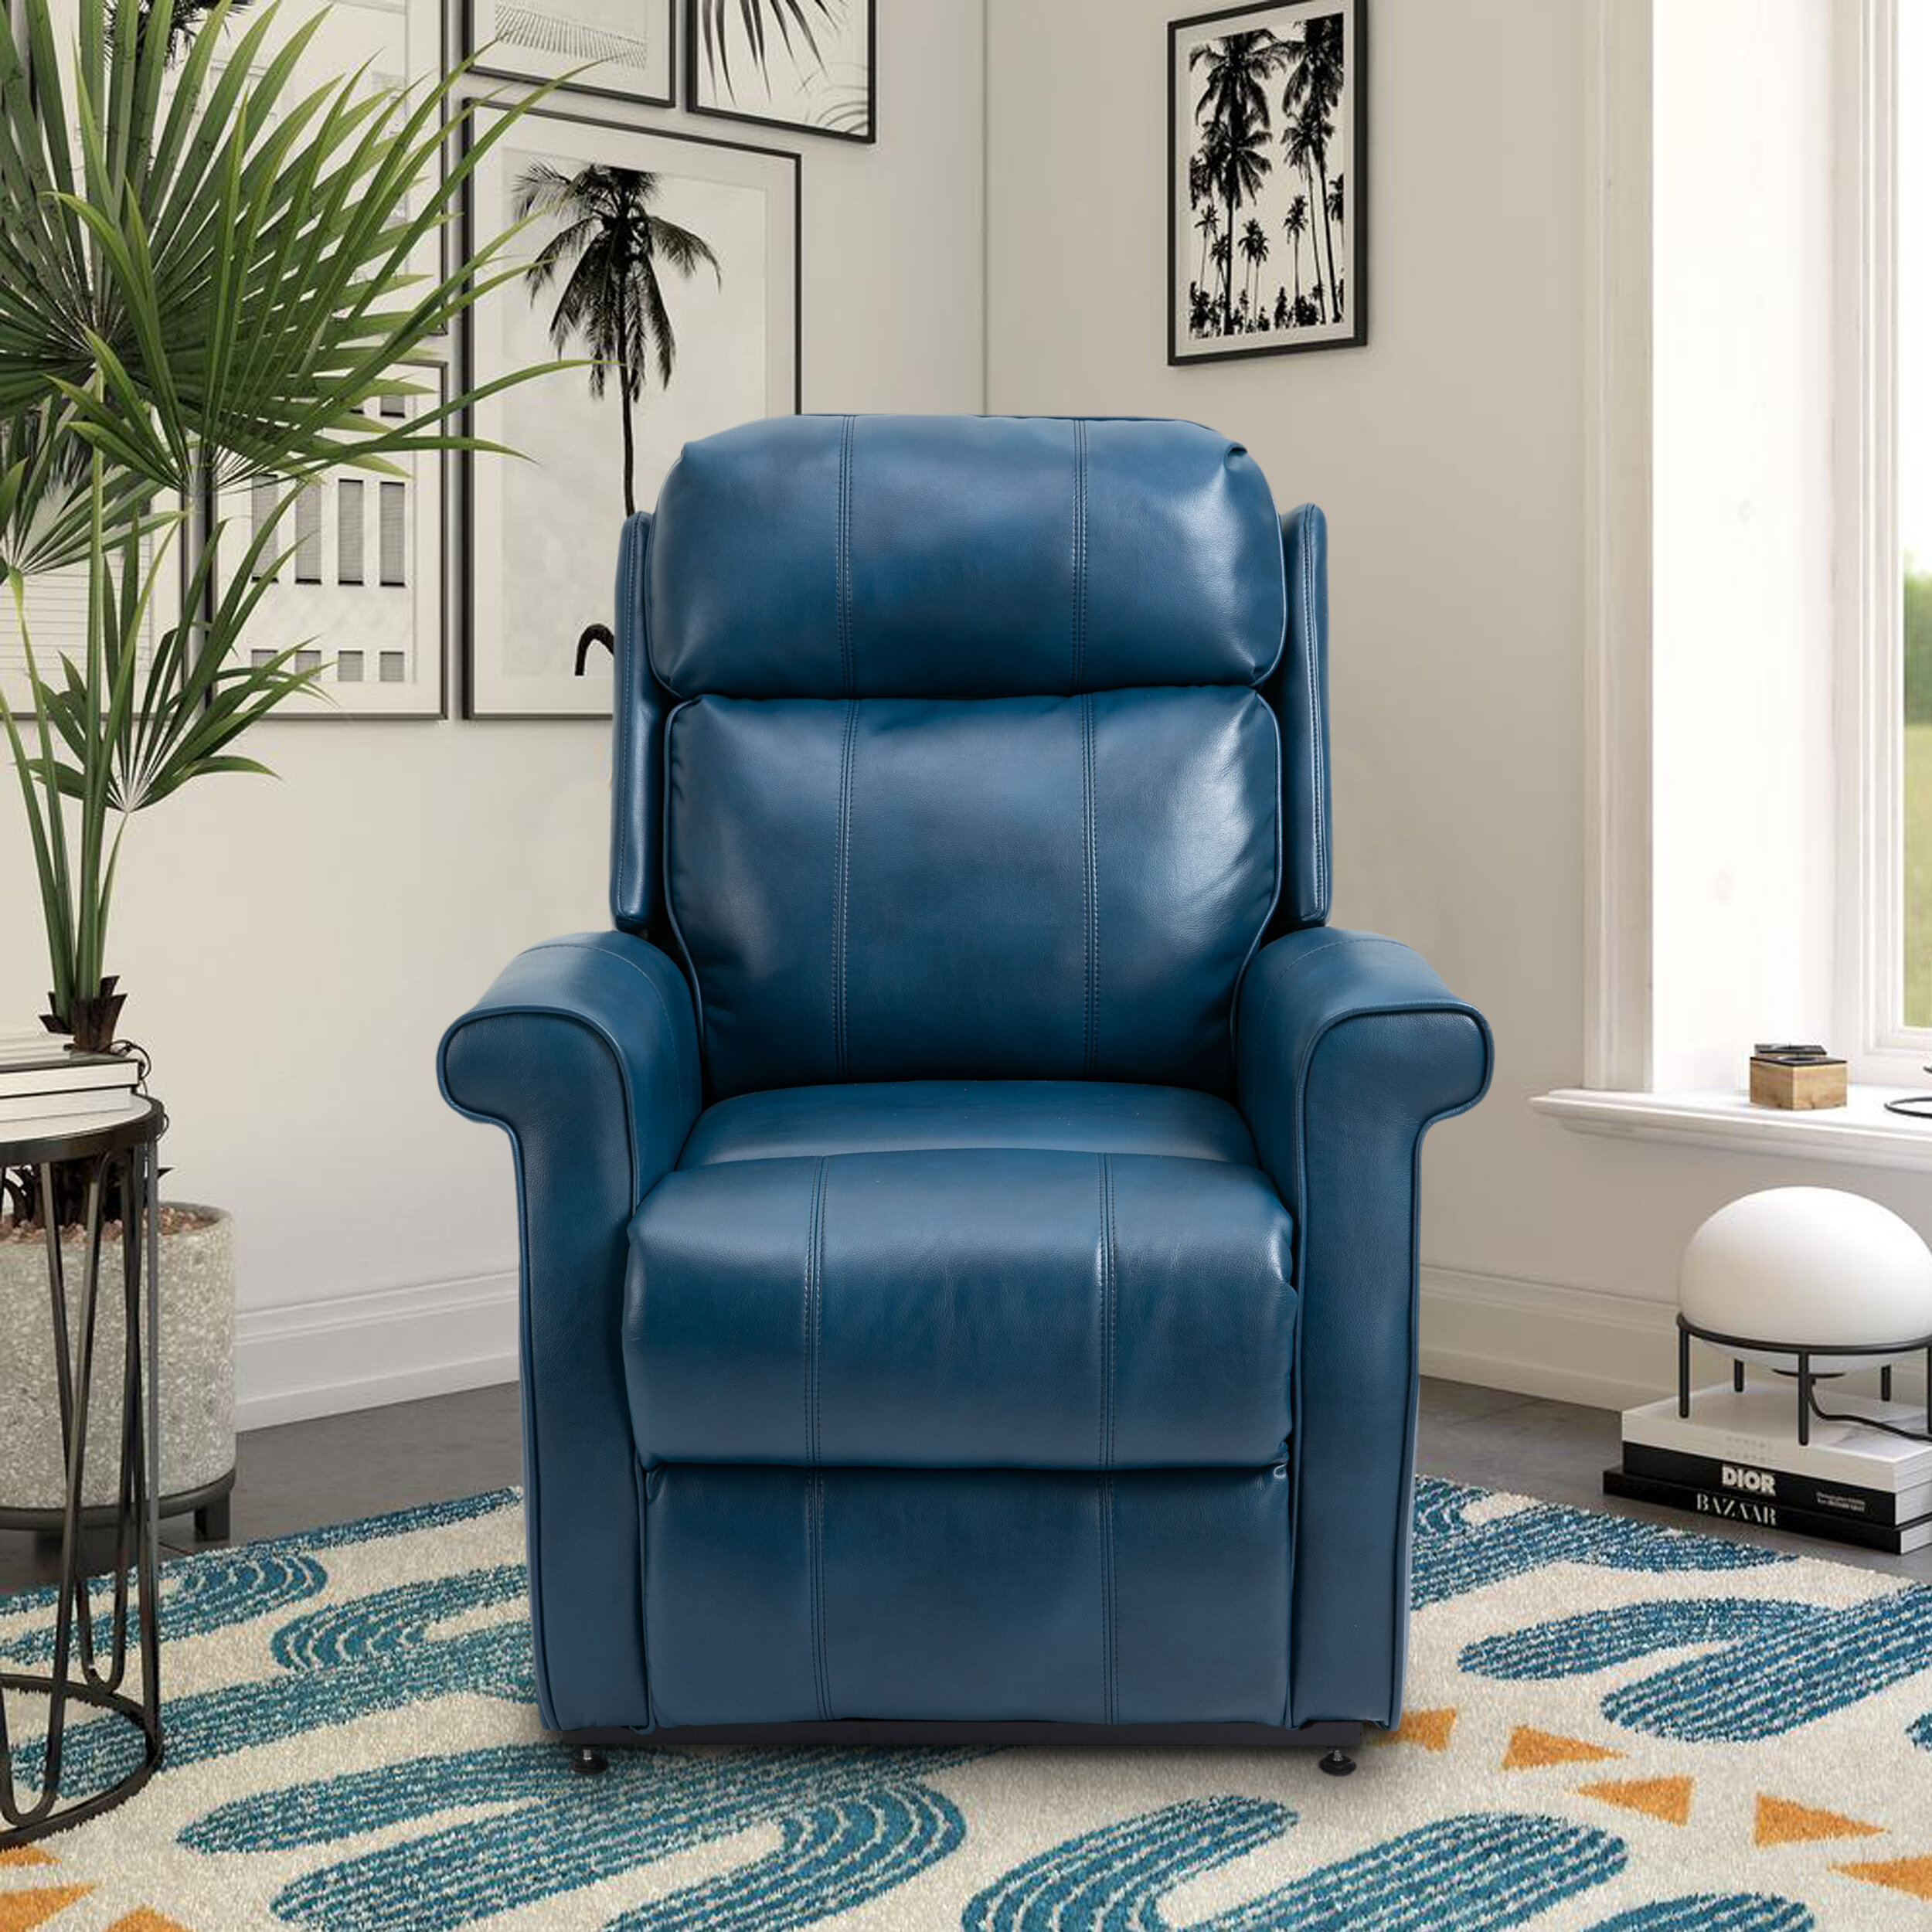 Blue Faux Leather Elderly Power Lift Recliner Chair Red Barrel Studio Fabric: Blue Faux Leather